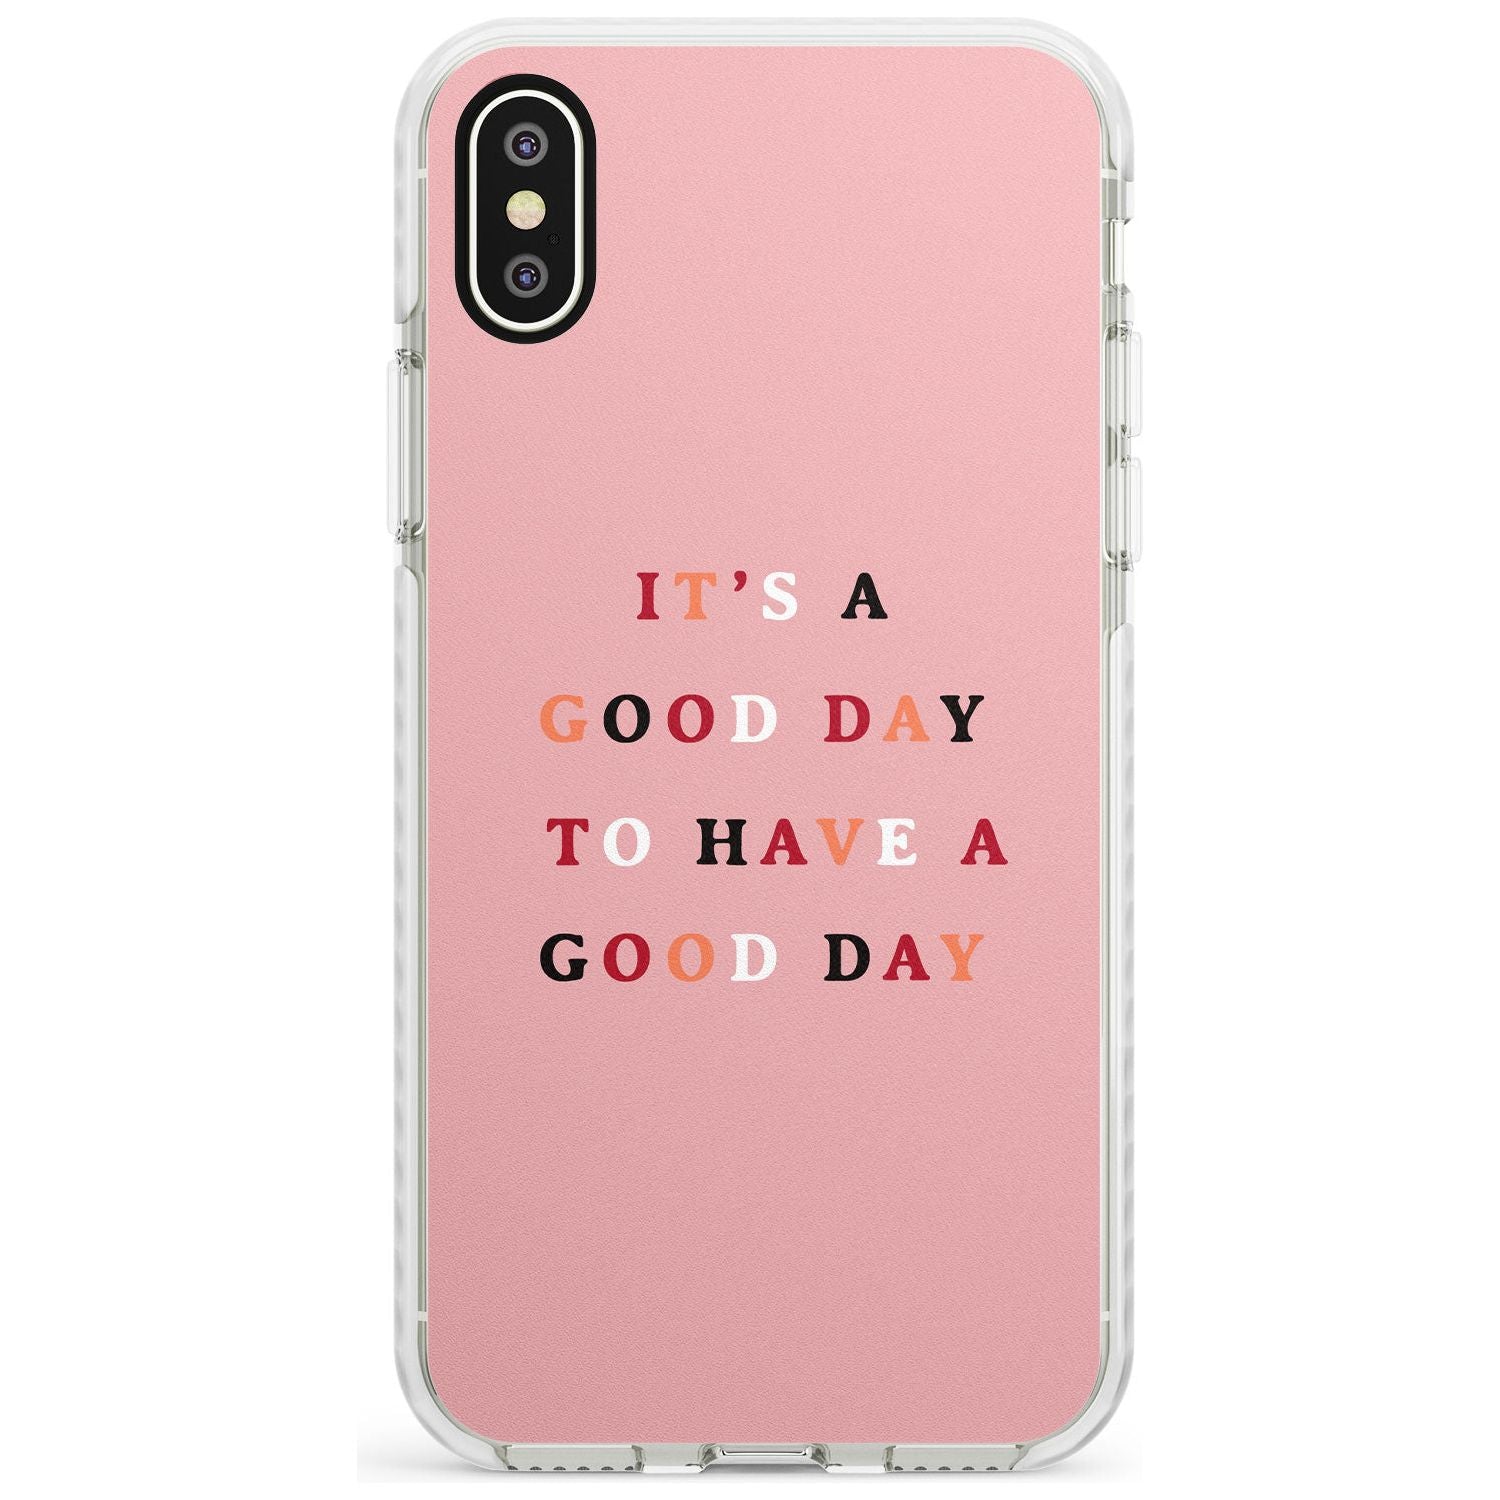 It's a good day to have a good day Impact Phone Case for iPhone X XS Max XR